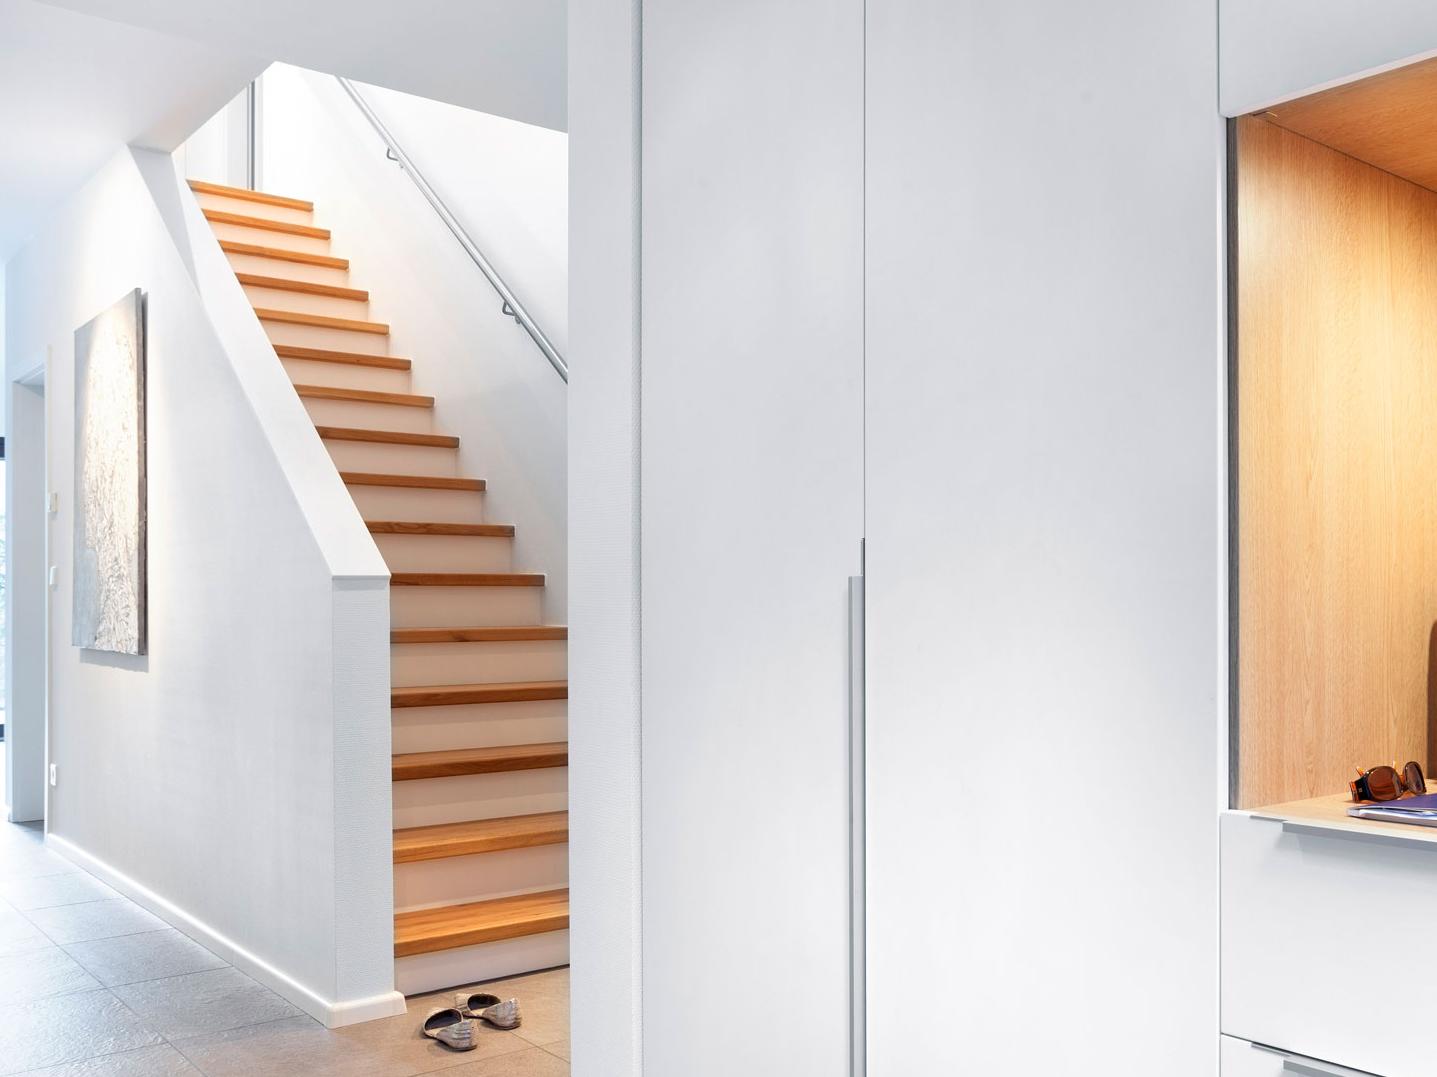 Stair Forms - Straight staircase with a simple handrail